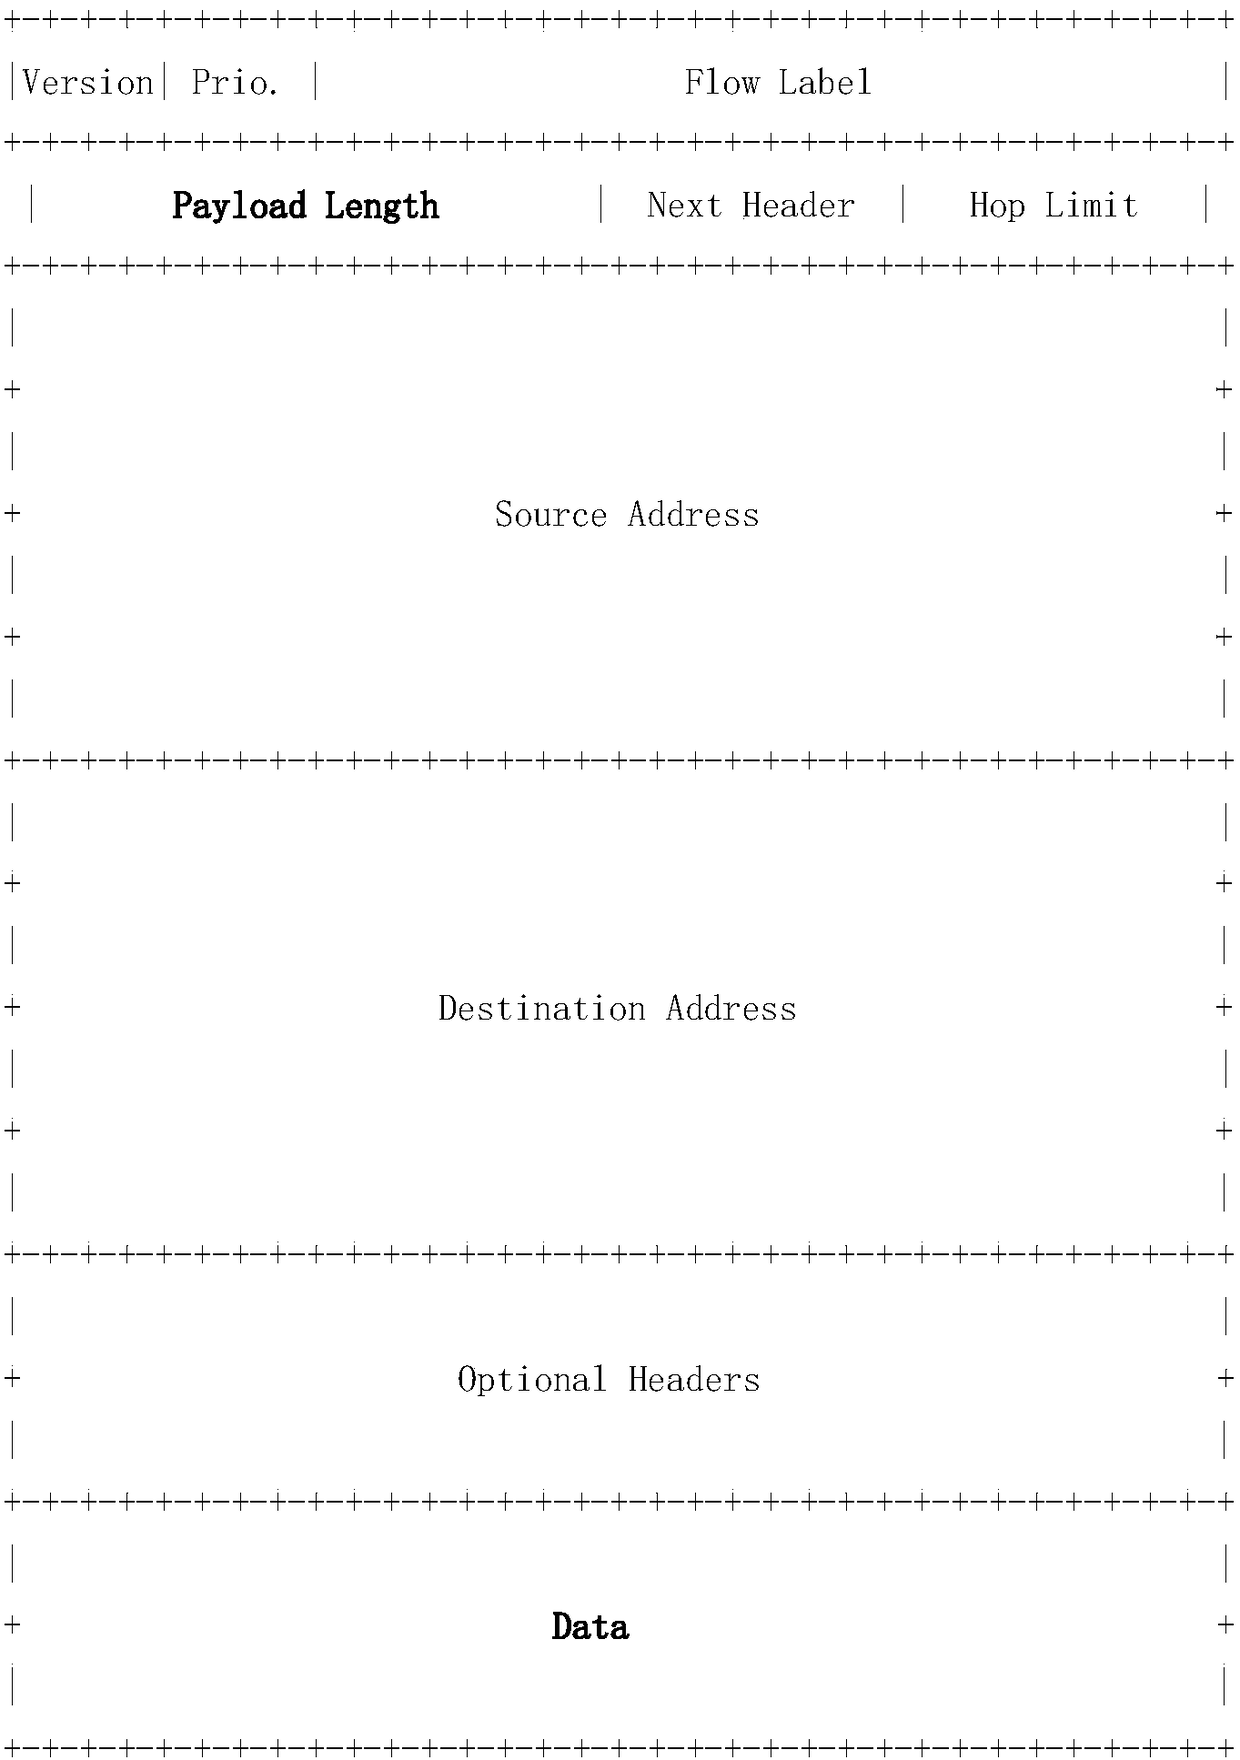 Secure network establishment method and system based on secure module